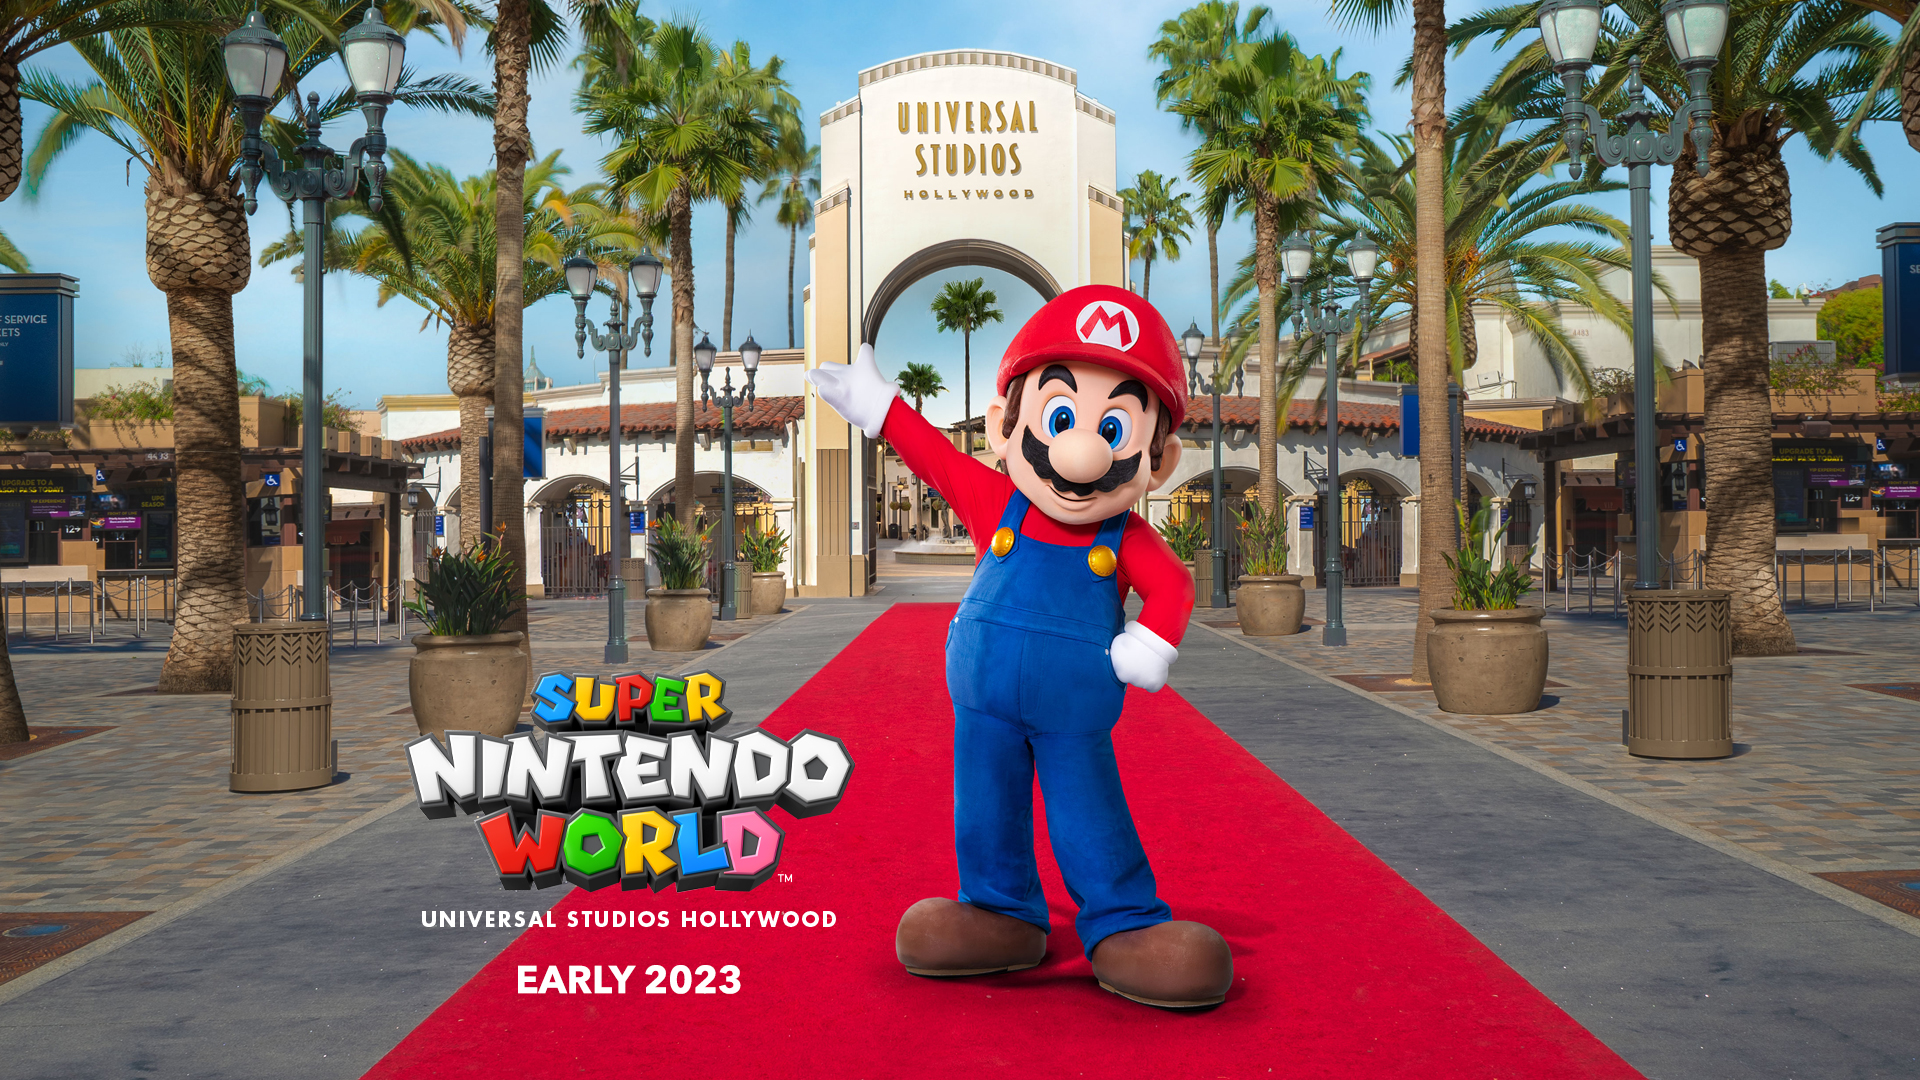 Call your boss for time off: Super Nintendo World opens in the US early next year